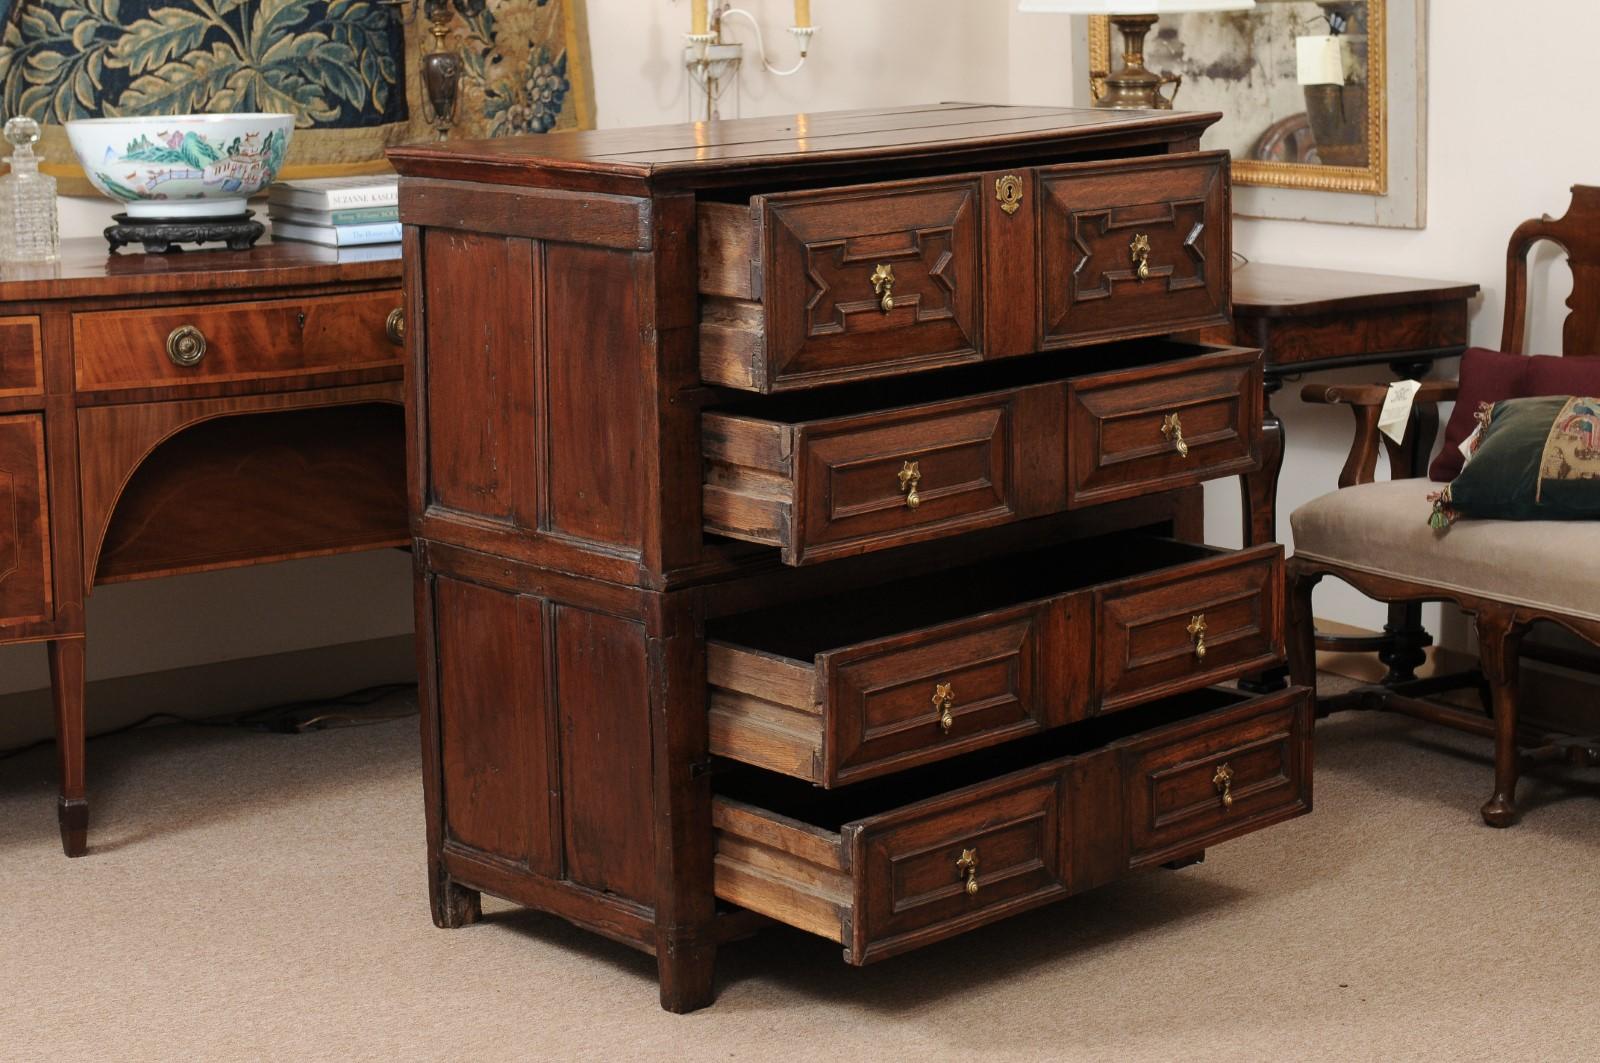 18th Century English Jacobean Style Oak Chest with 4 Drawers For Sale 1